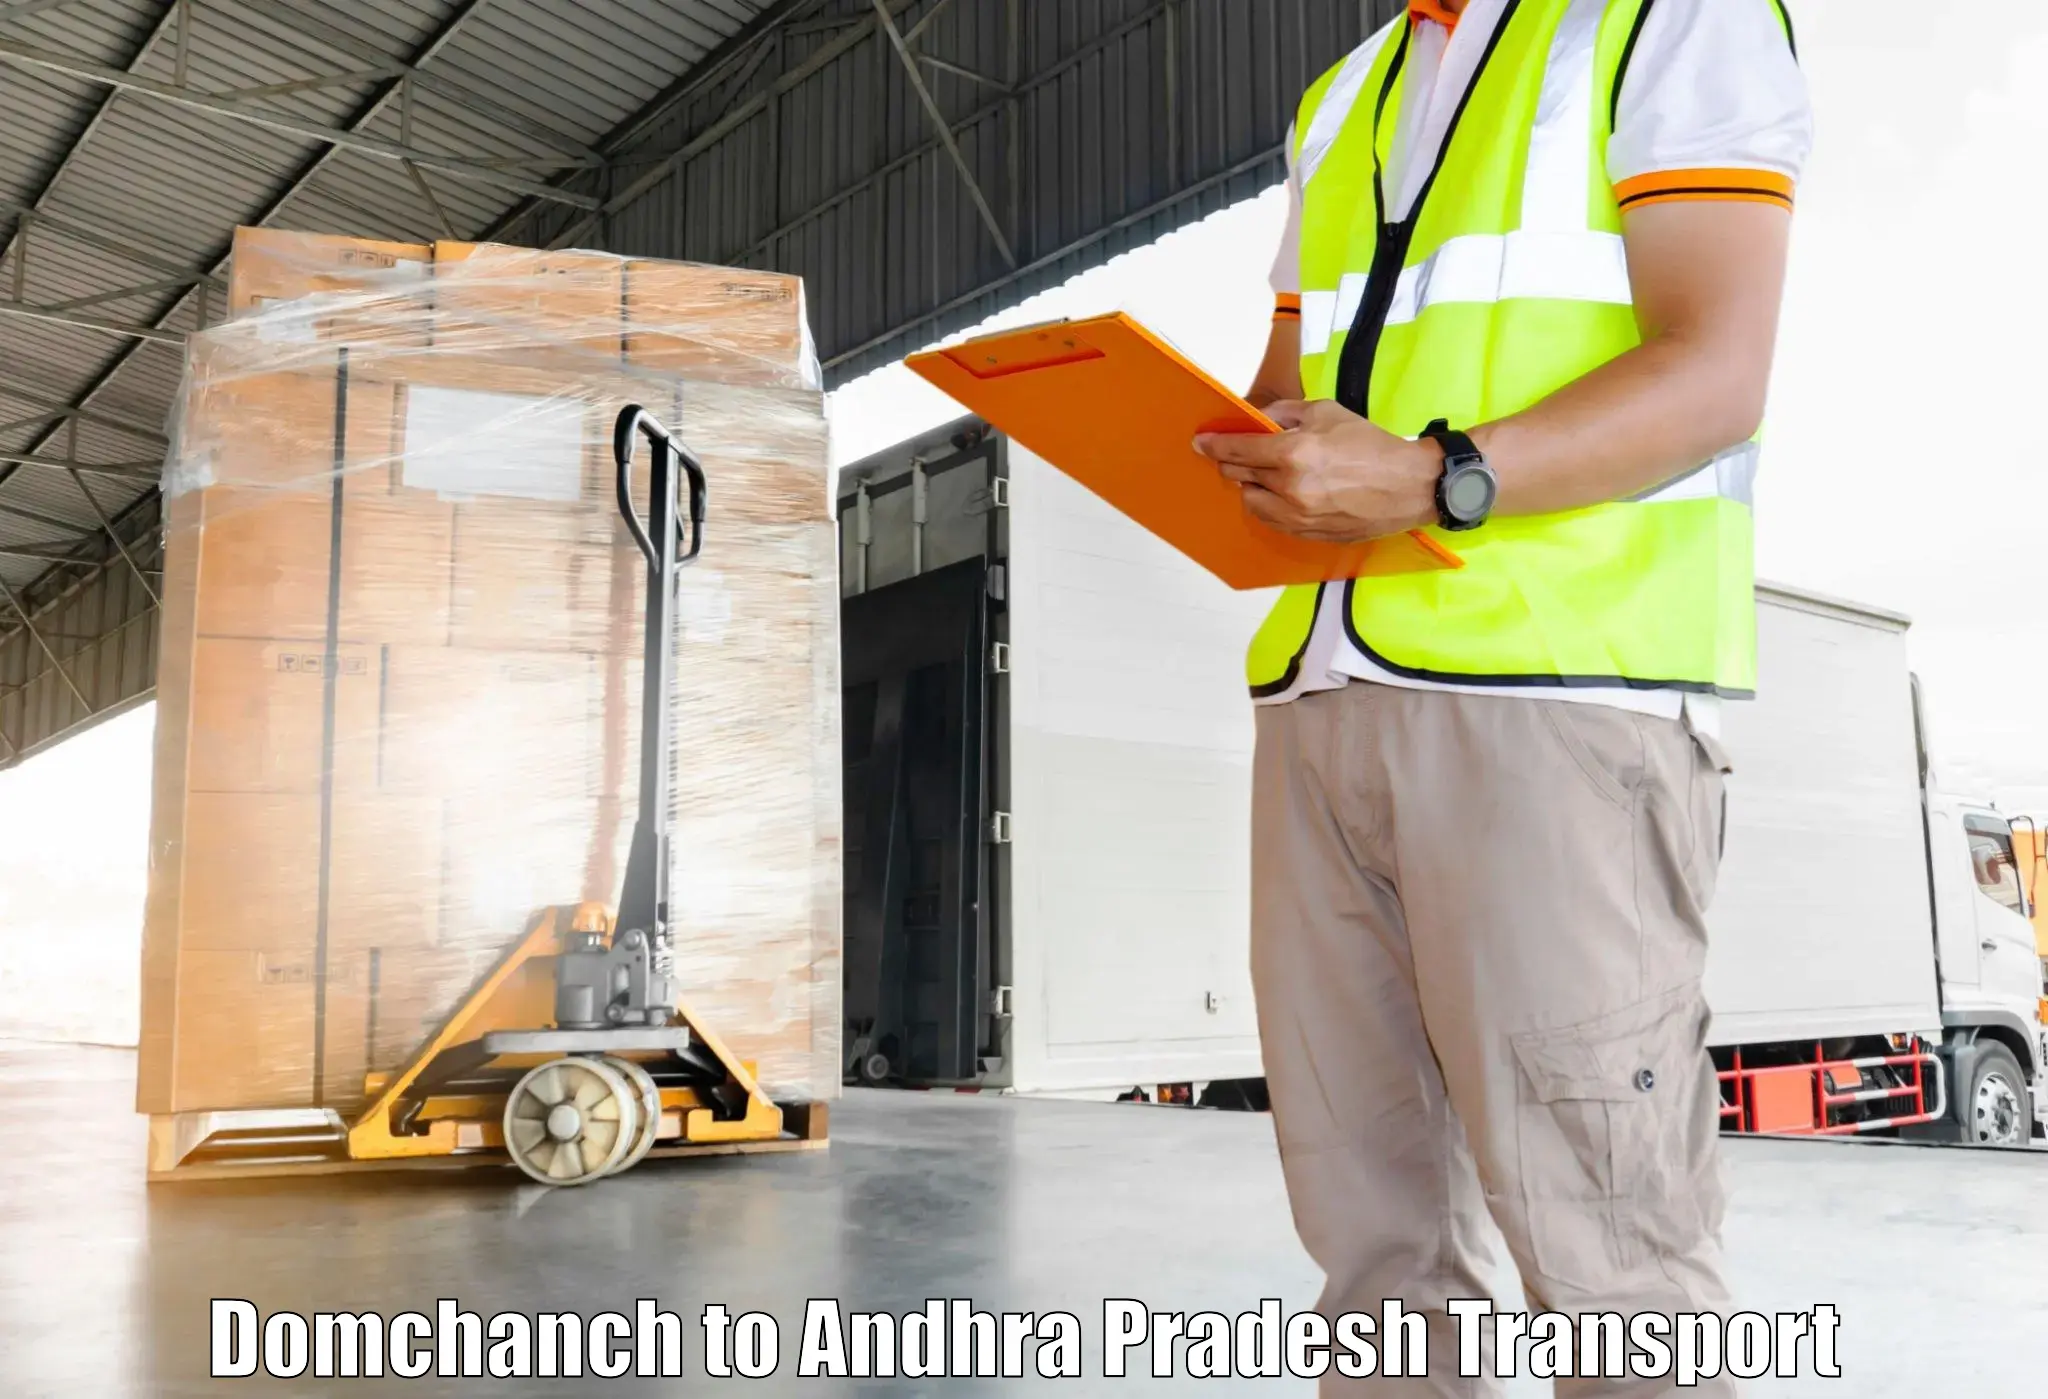 Best transport services in India Domchanch to Cuddapah